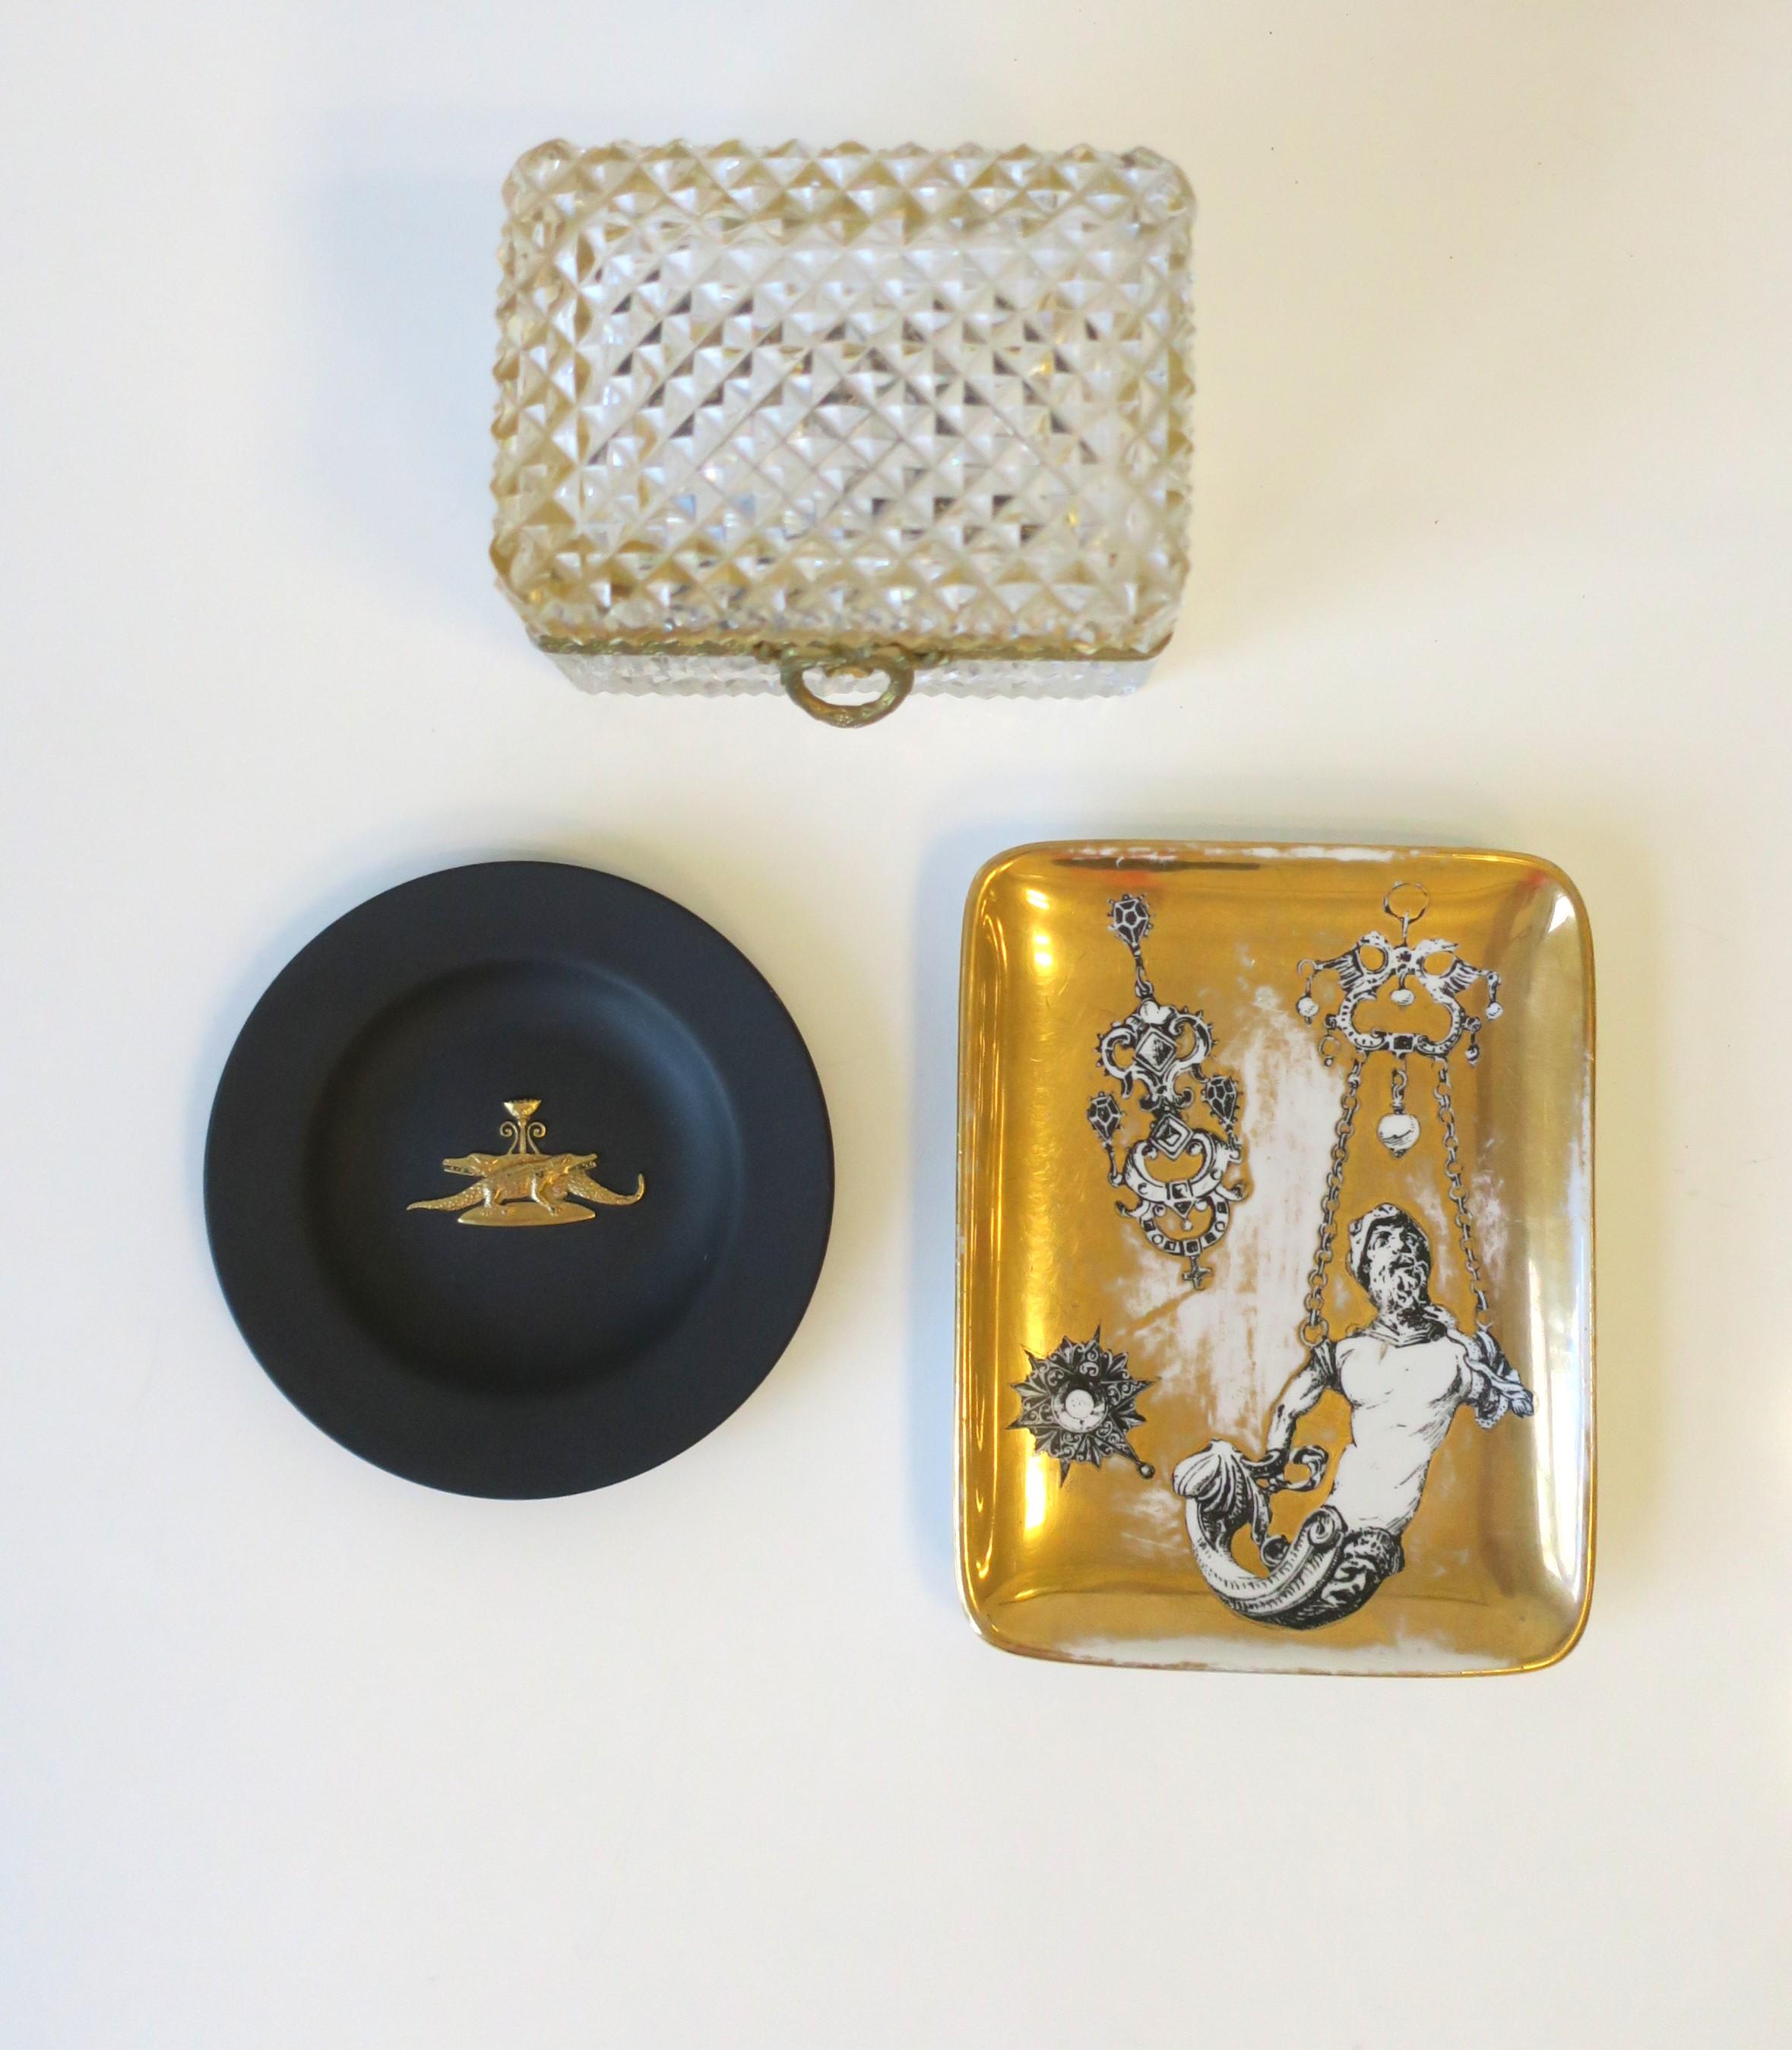 English Wedgwood Black Basalt and Gold Jewelry Dish In Good Condition For Sale In New York, NY